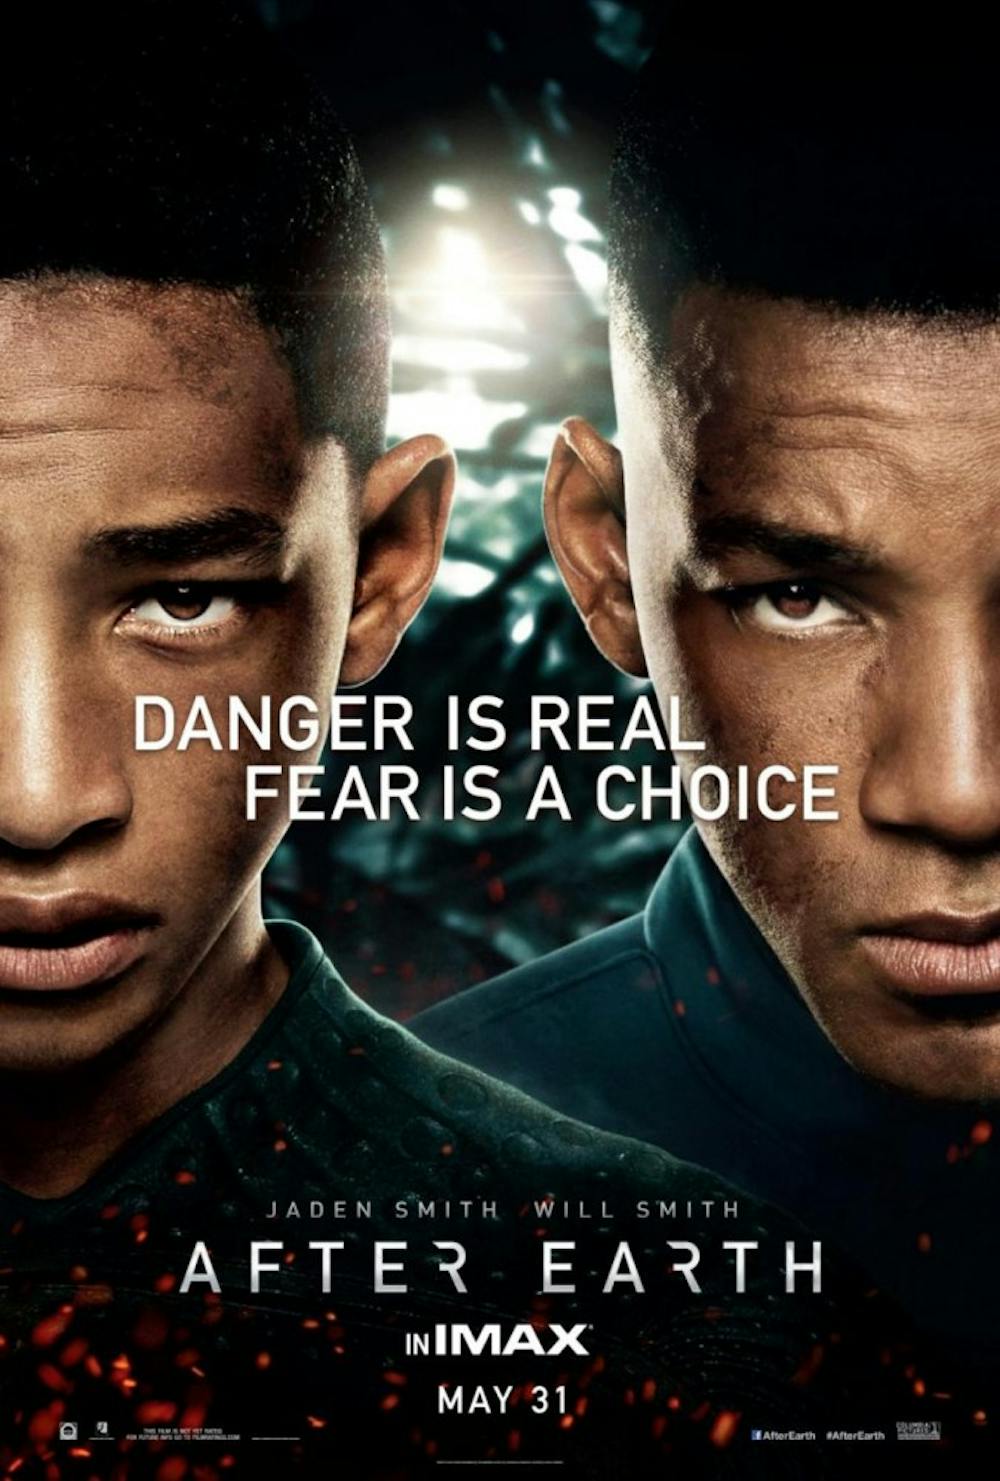 After Earth’s bright spots get lost amongst its faults